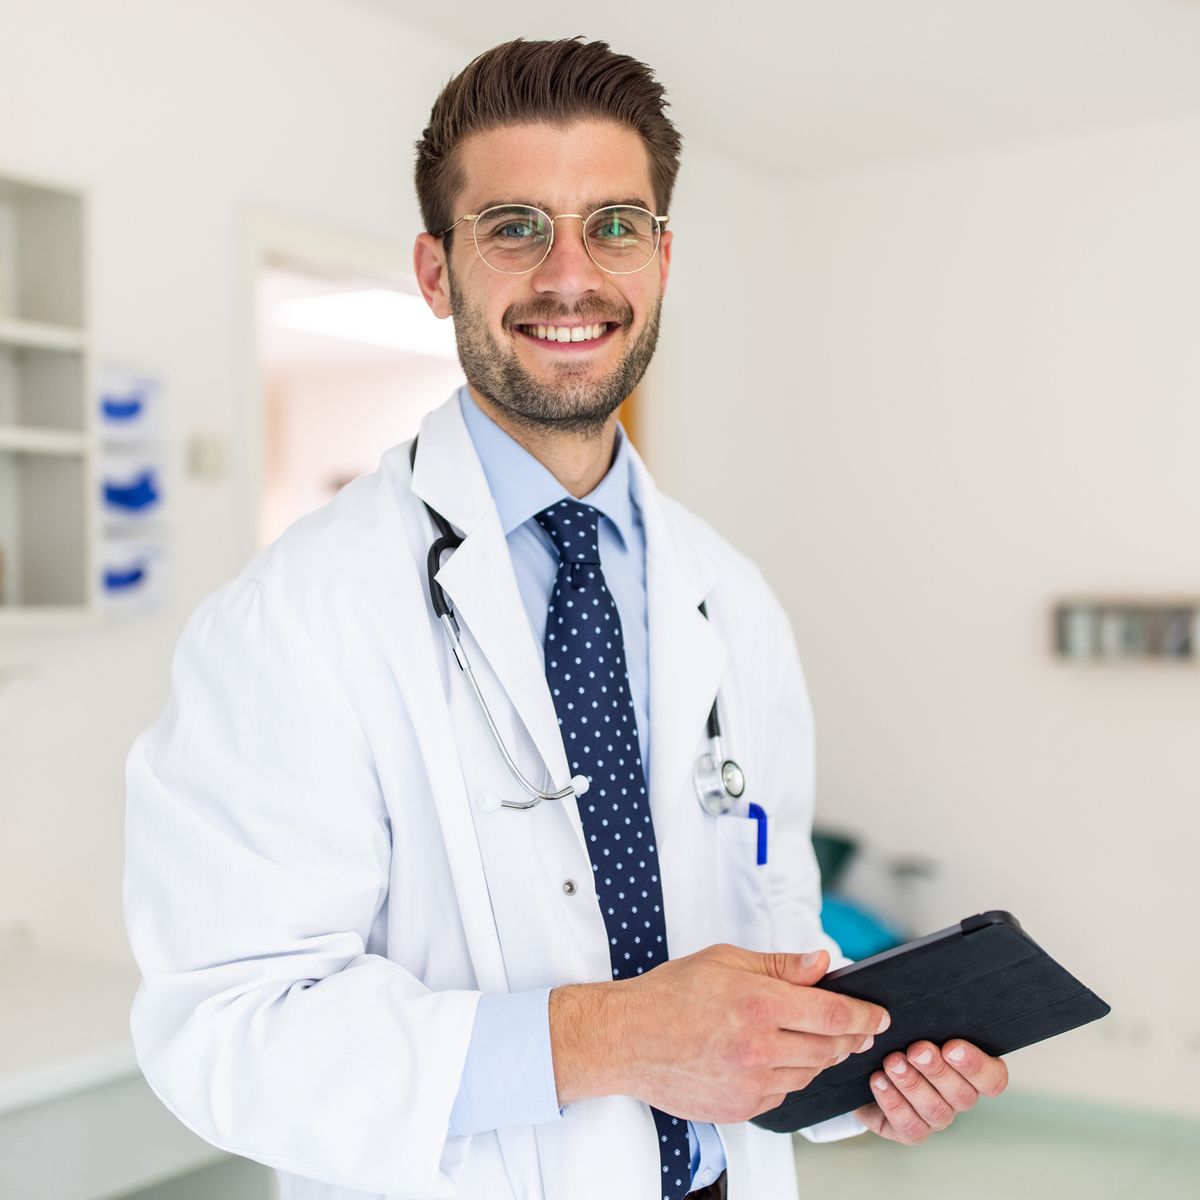 https://hips.hearstapps.com/hmg-prod/images/portrait-of-a-happy-young-doctor-in-his-clinic-royalty-free-image-1661432441.jpg?crop=0.66698xw:1xh;center,top&resize=1200:*